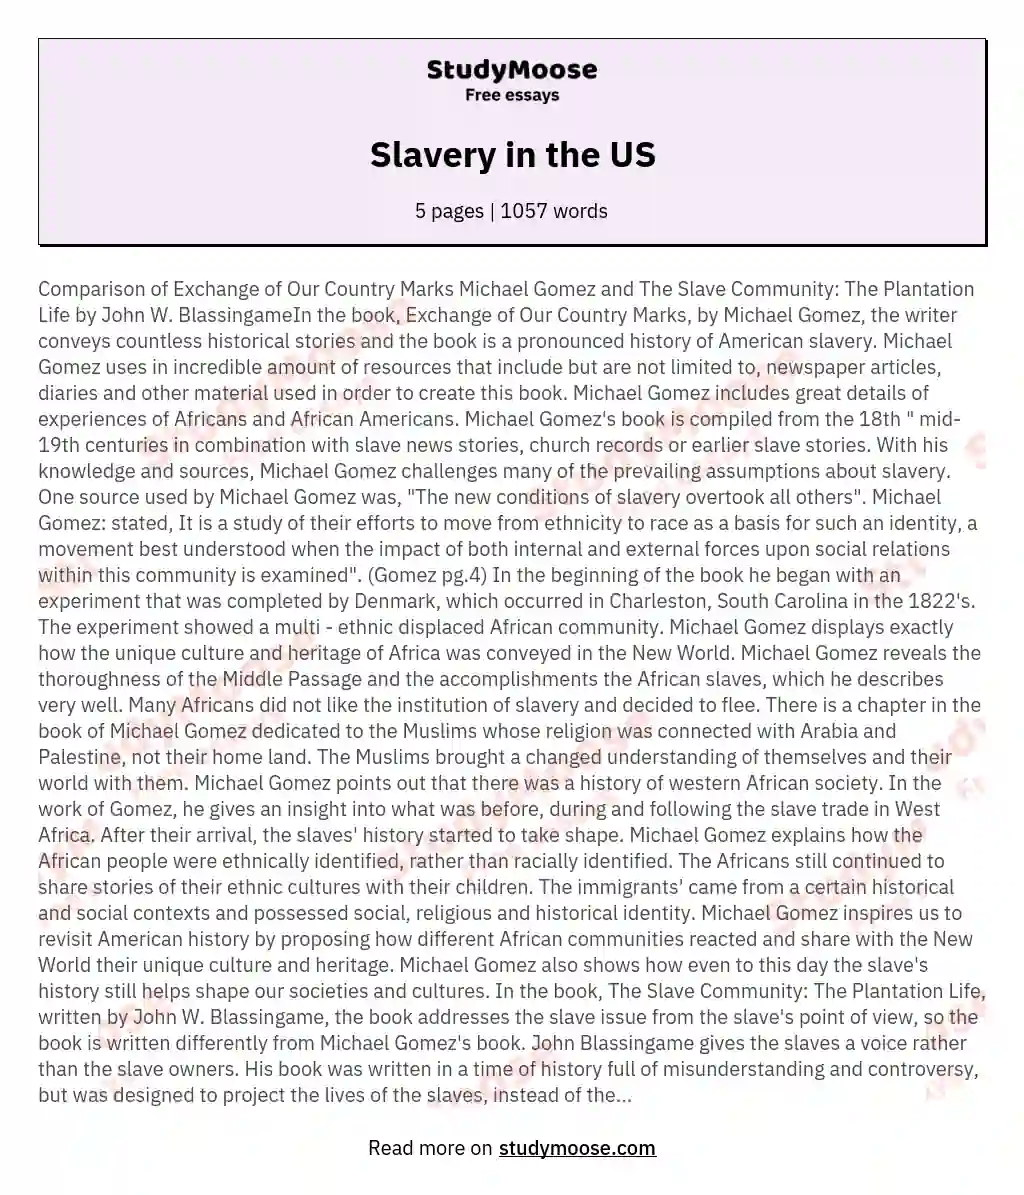 Slavery in the US essay